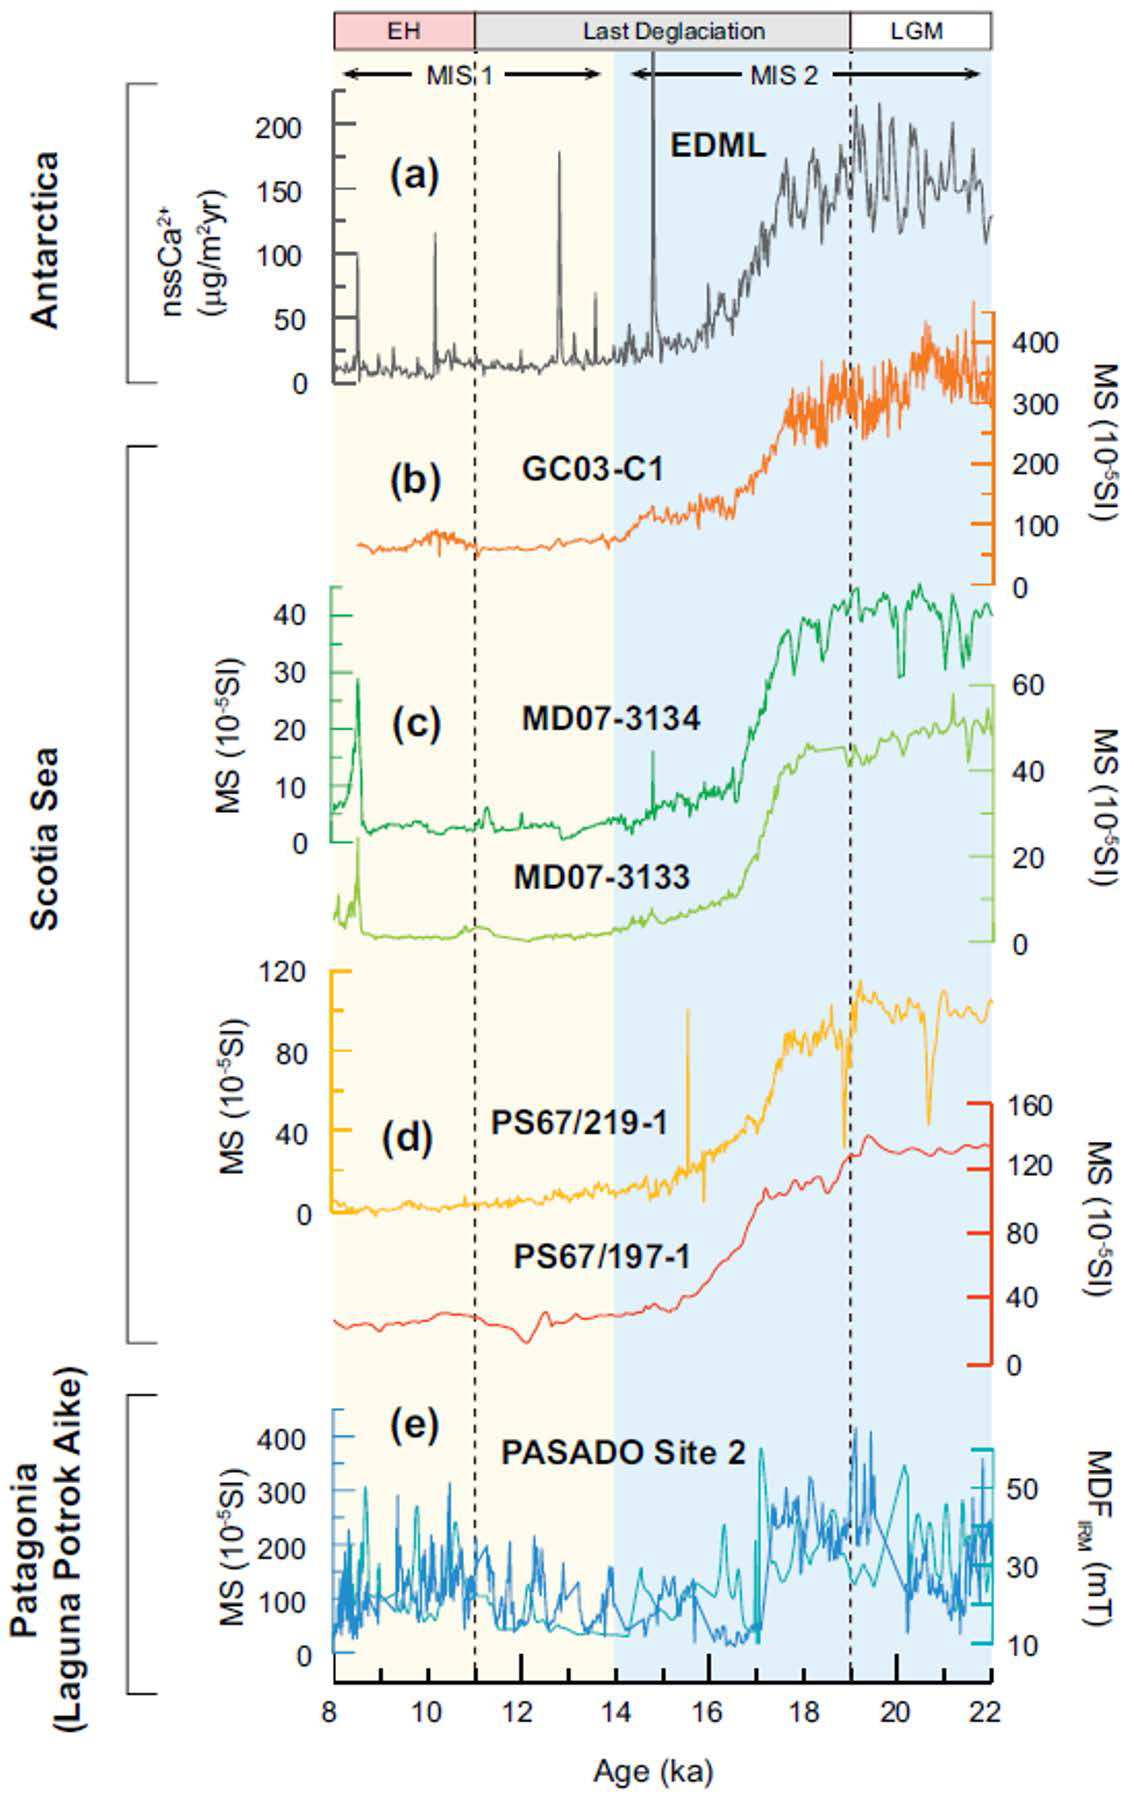 Comparison among Antarctic ice core dust record and MS records in the Scotia Sea and Patagonia. (a) Non-sea-salt Ca2+ (nssCa2+) flux of EDML ice core from Antarctica (Fischer et al., 2007); MS records of (b) GC03-C1 (Bak et al., 2010), (c) MD07-3134 and MD07-3133 (Weber et al., 2012), (d) PS67/219-1 and PS67/197-1 (Xiao et al., 2016) from the Scotia Sea; and (e) MS (dark blue) and median destructive field of IRM (MDFIRM; light blue) from PASADO Site 2 from Laguna Potrok Aike in Patagonia (Lis -Pronovost et al., 2015). (For interpretation of the references é to colour in this figure legend, the reader is referred to the web version of this article.)